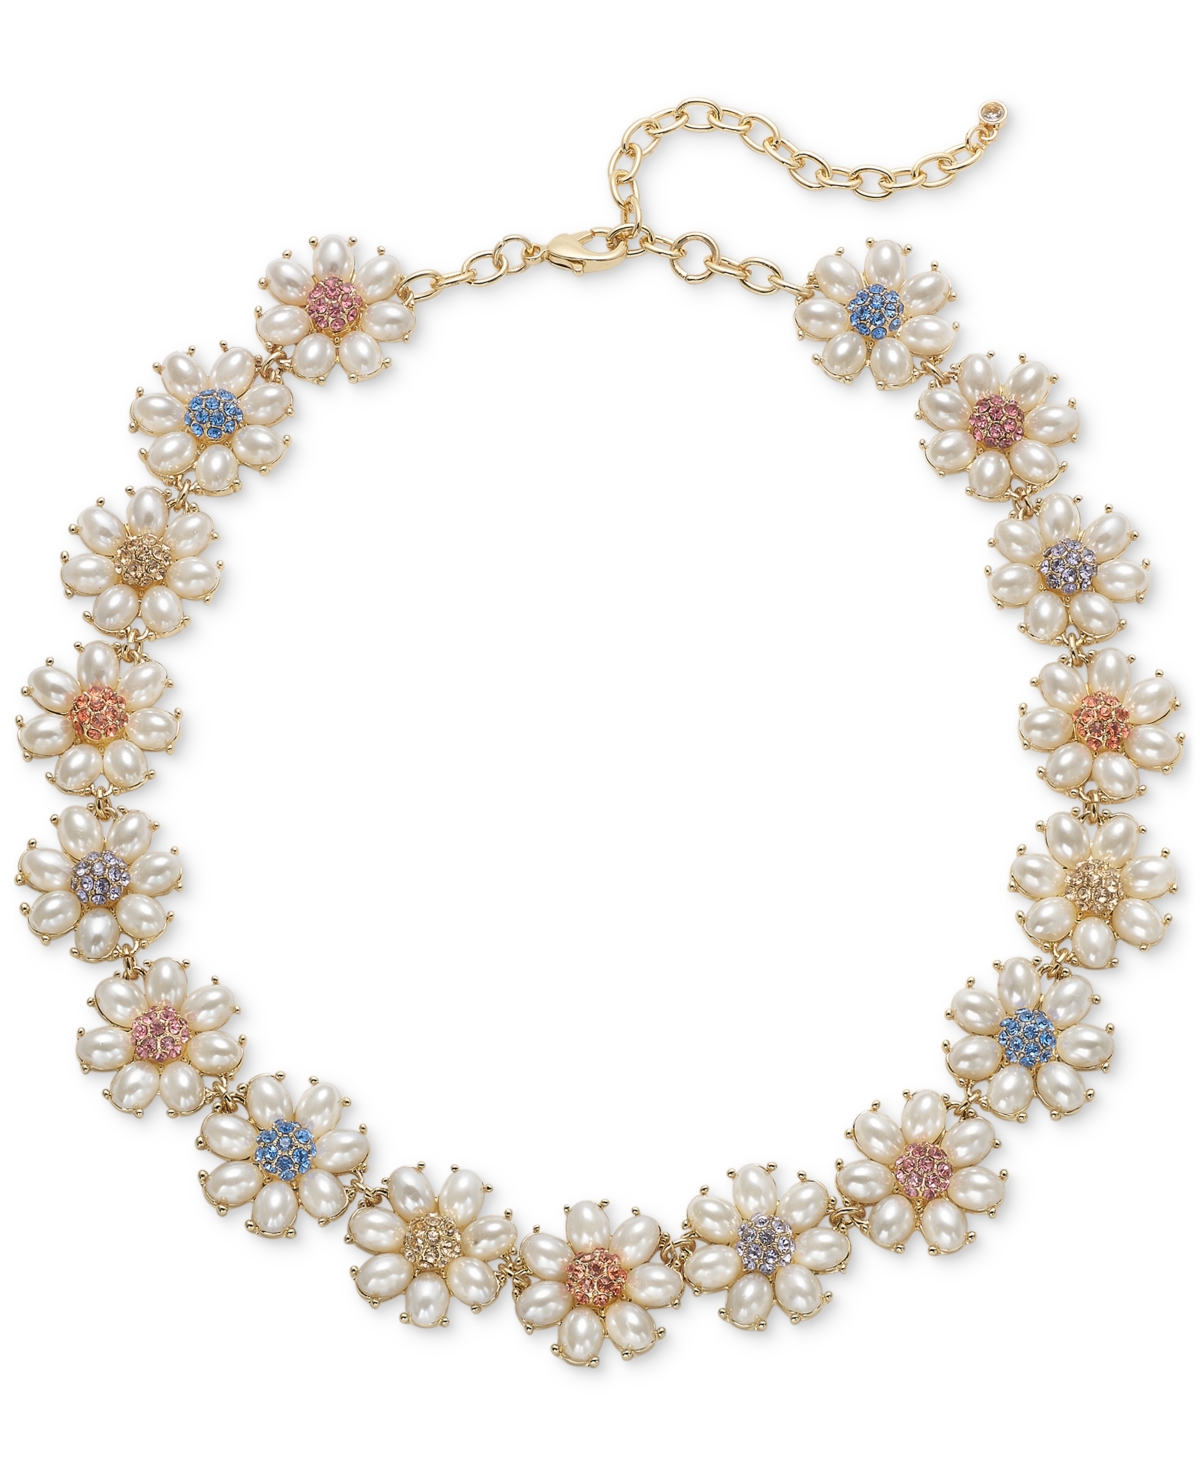 Gold-Tone Color Pave & Imitation Pearl Flower All-Around Collar Necklace, 17" + 3" extender, Created for Macy's - Multi